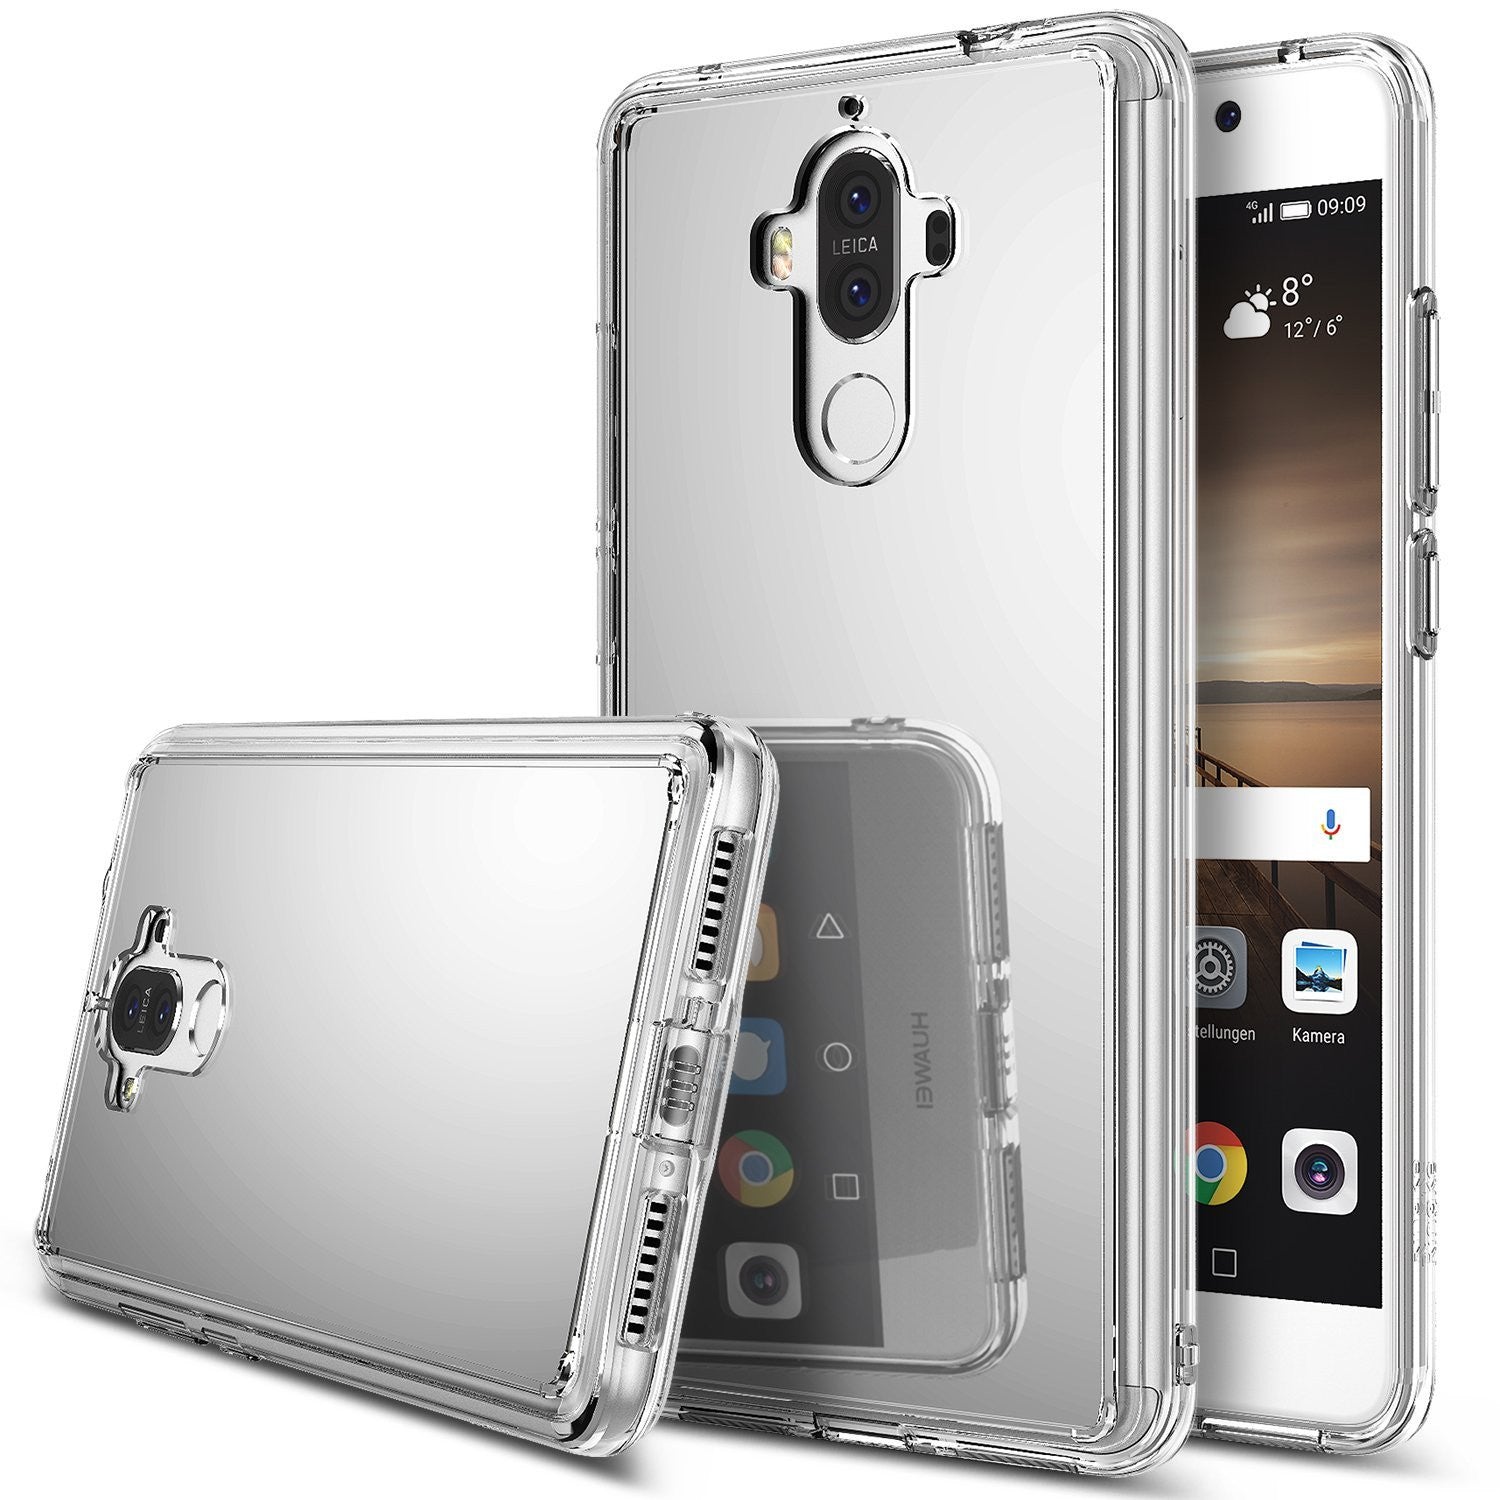 huawei mate 9 case ringke fusion case mirror case bright reflection radiant luxury mirror case silver